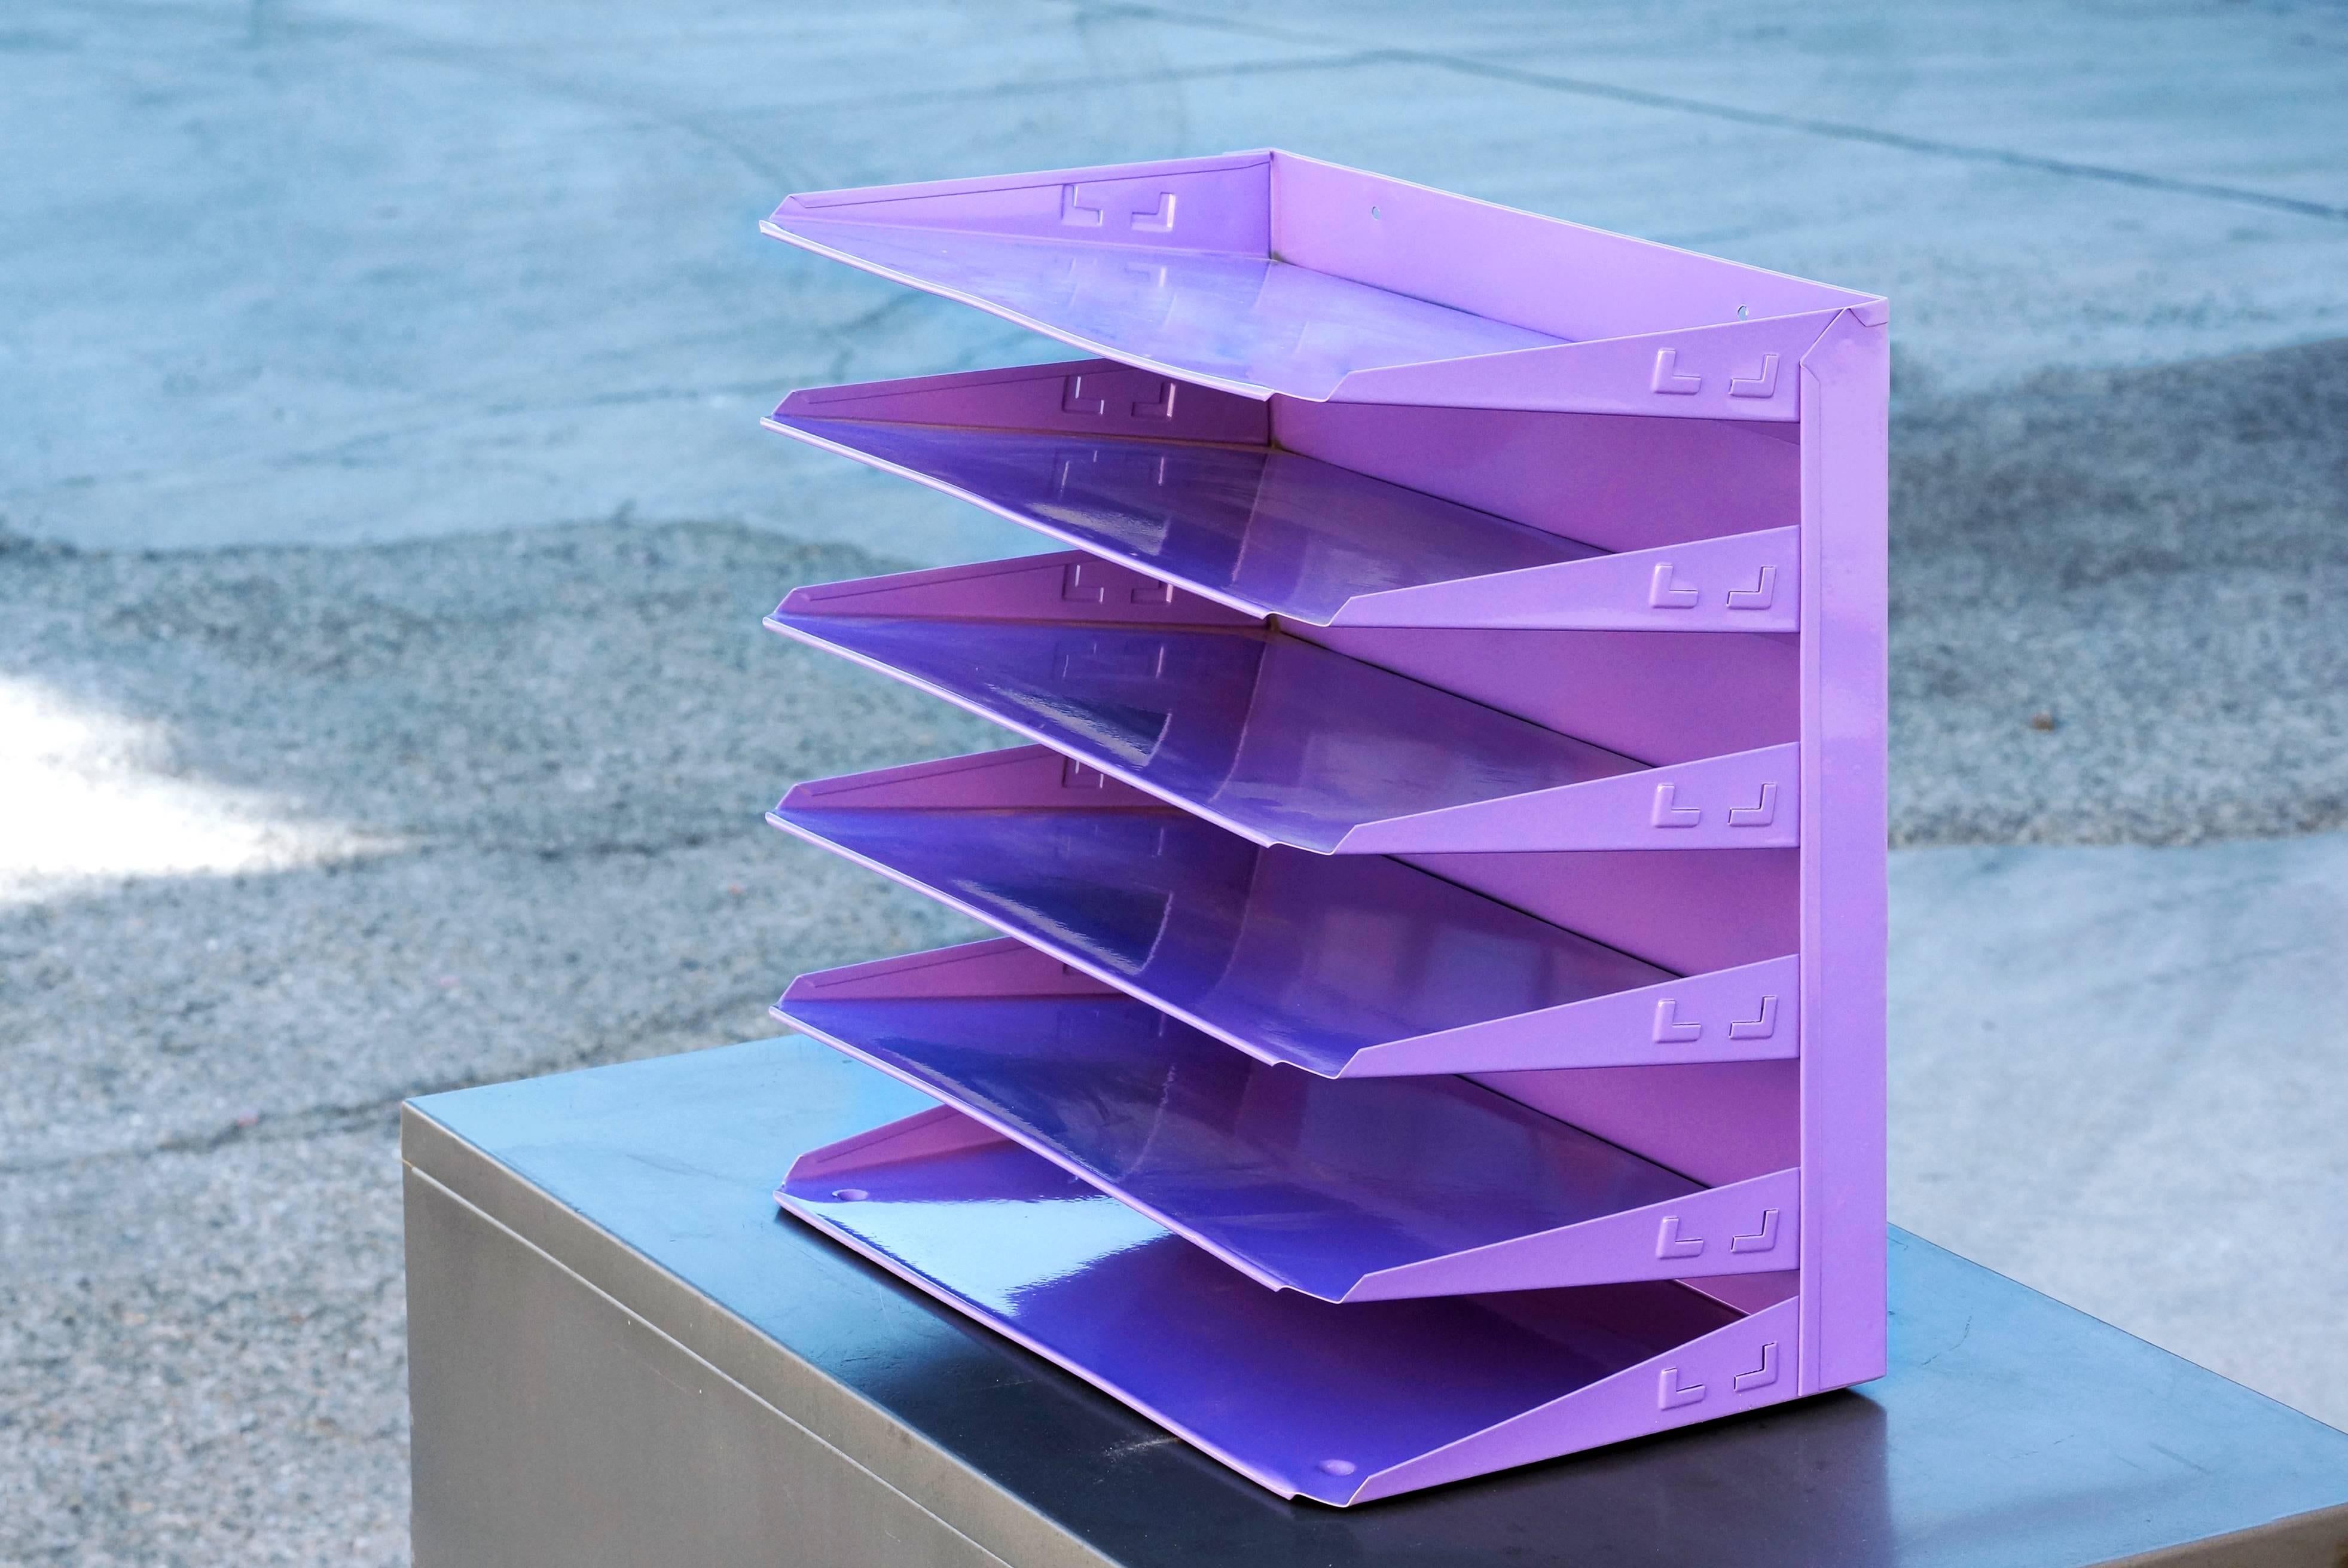 1970s retro office file or magazine holder stripped and freshly powder coated in high gloss lilac. Features six paper slots sure to keep your Mid-Century Modern desk in tip-top shape. Easily wall-mounts.

Dimensions: 9